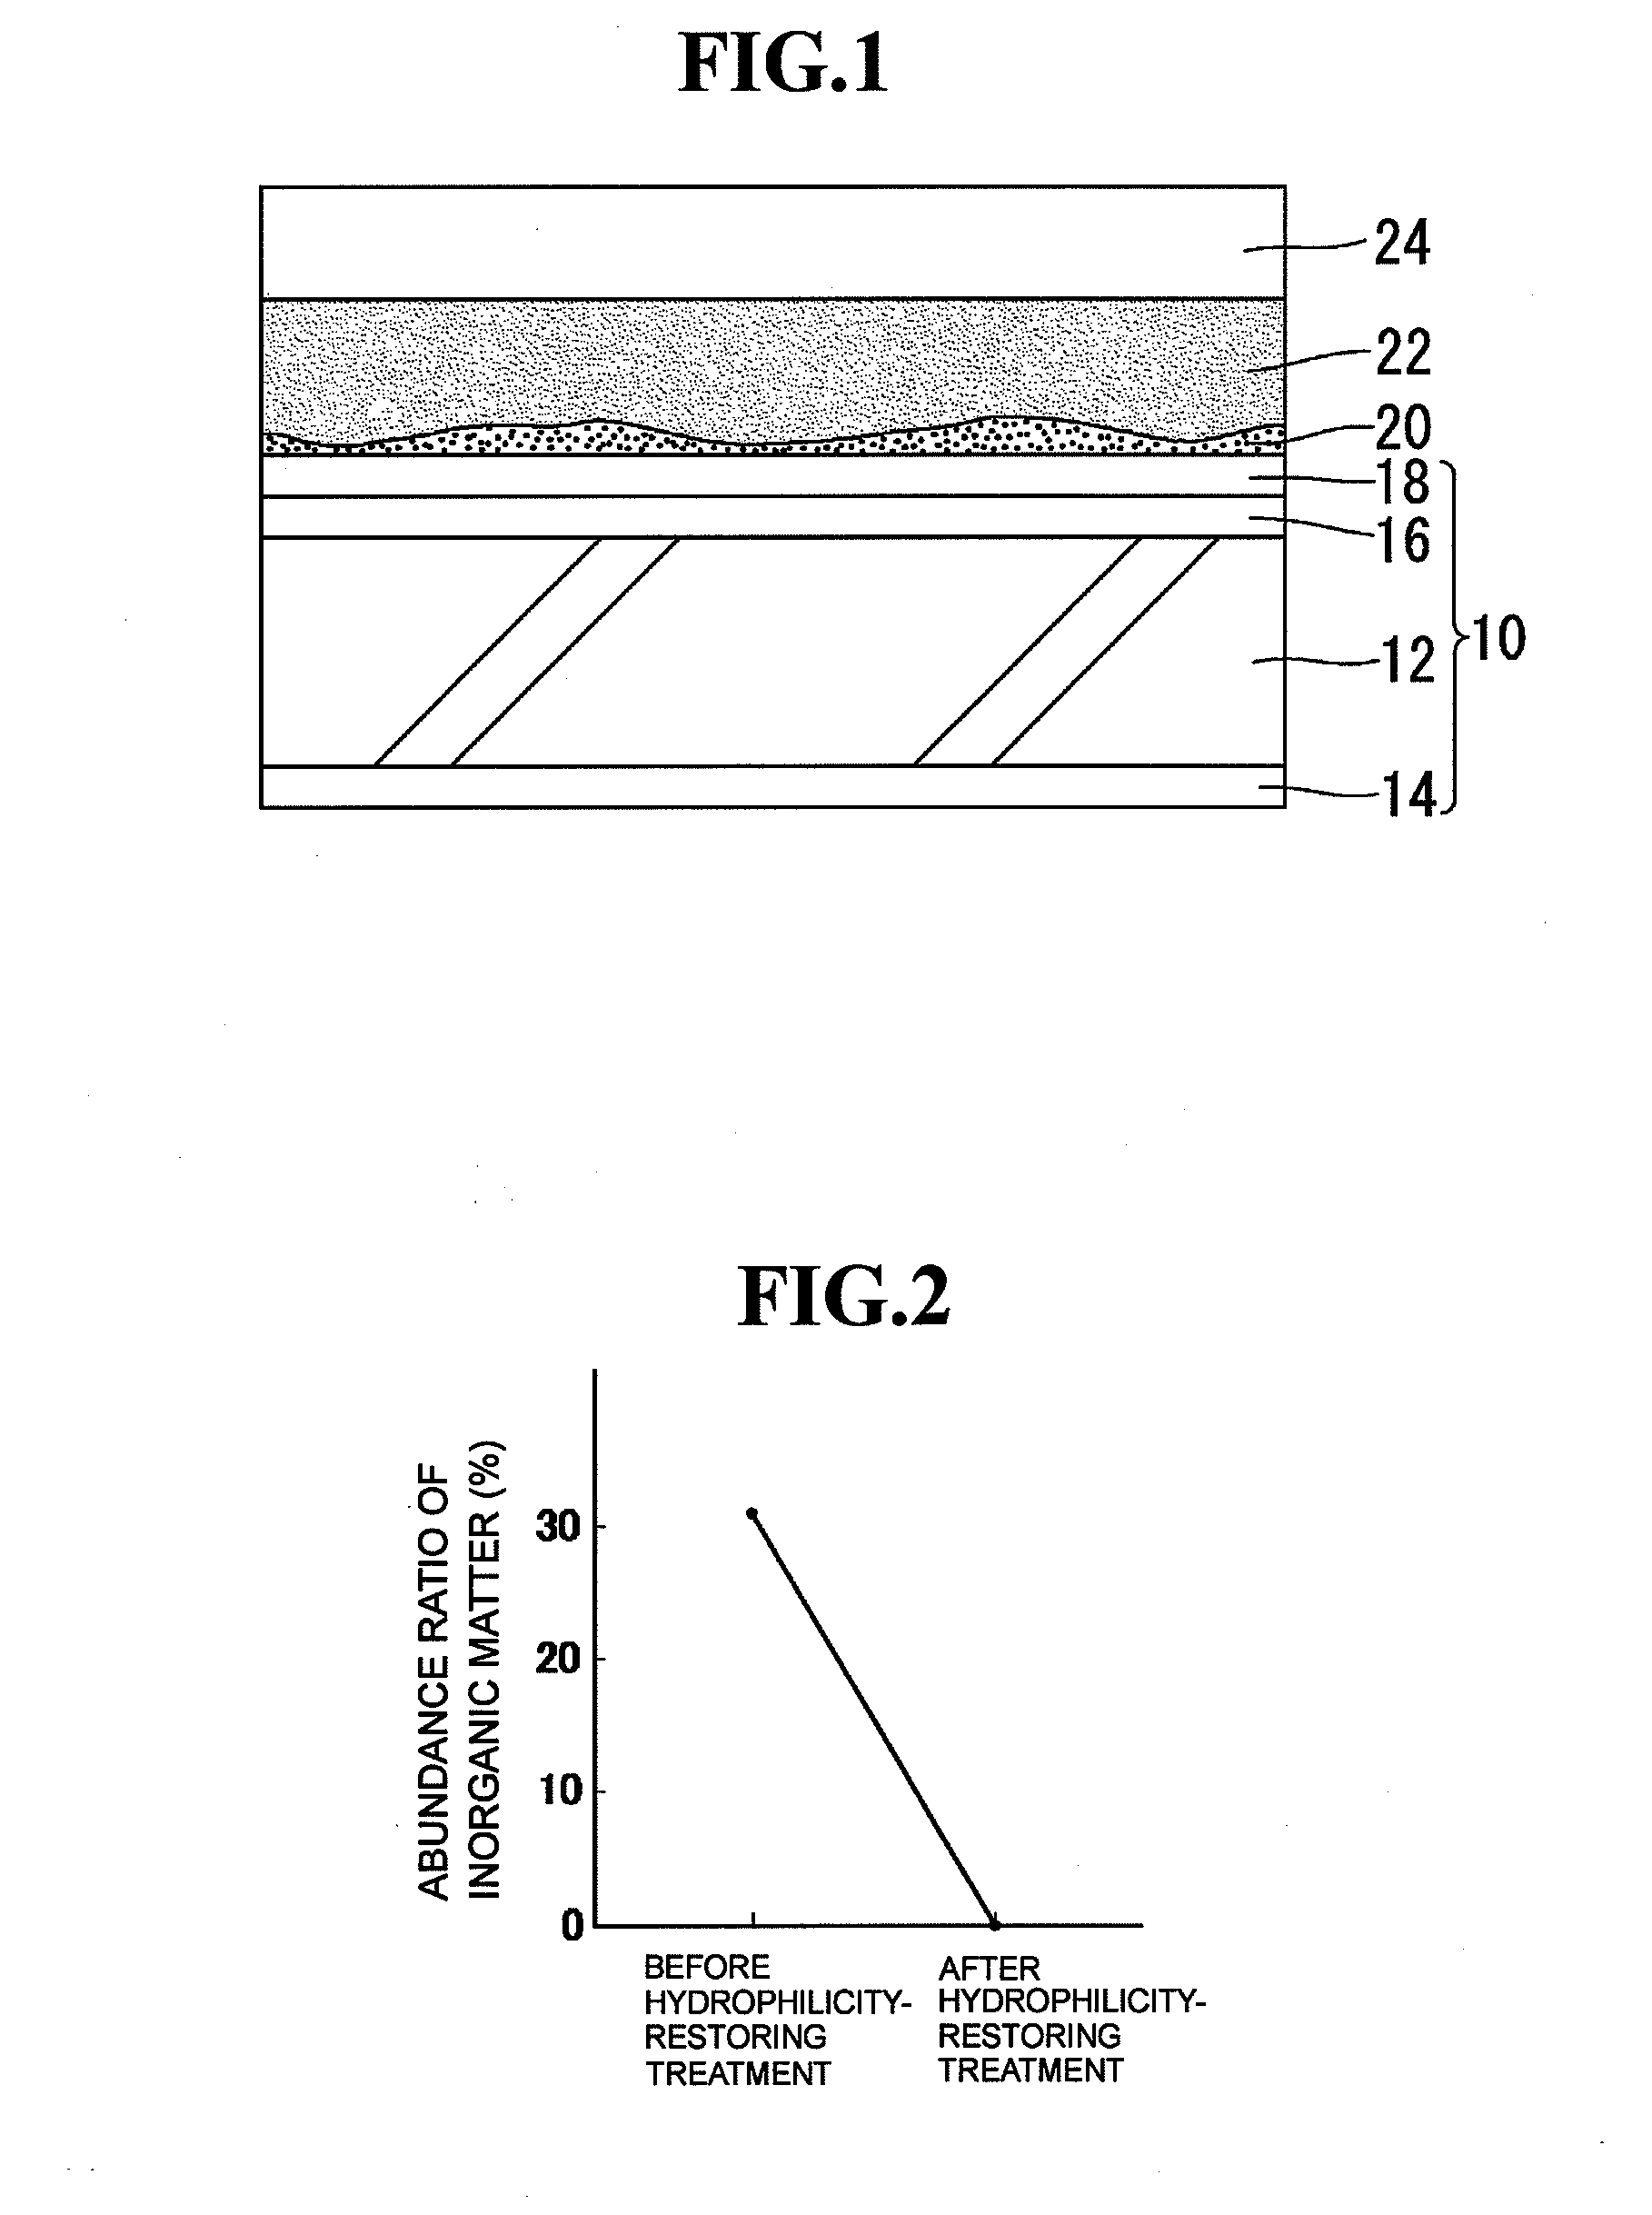 Hydrophilicity-restoring agent and method for restoring hydrophilicity